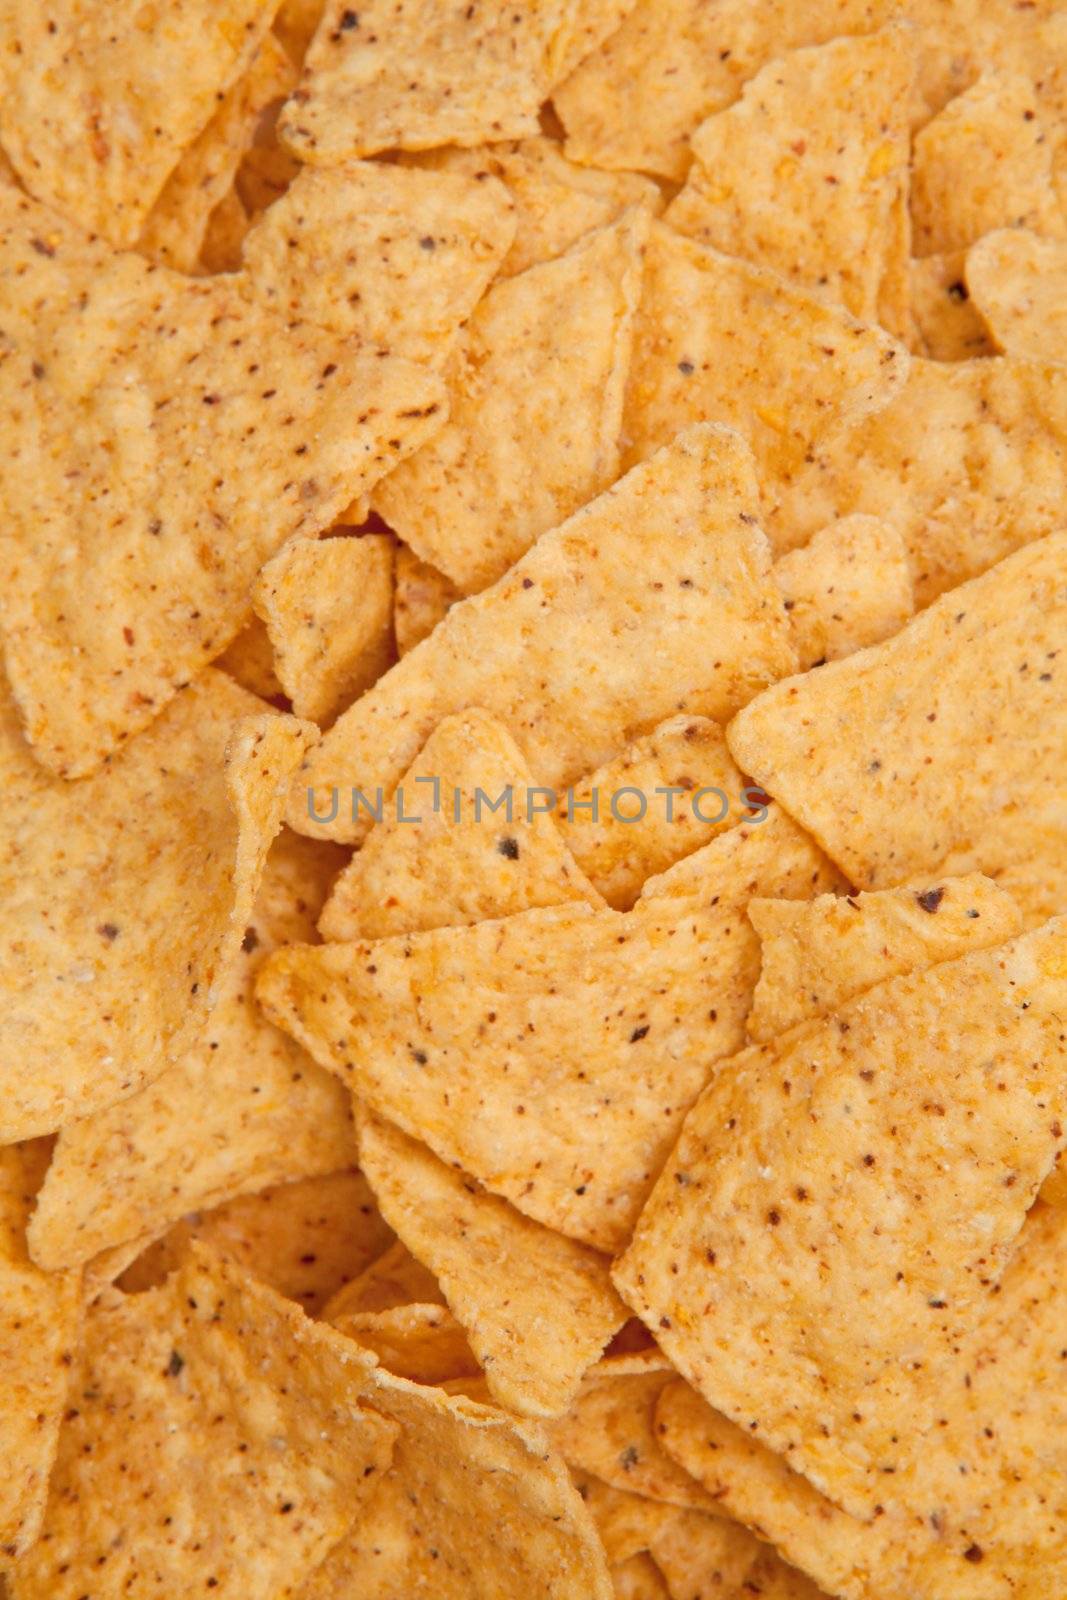 Triangle chips placed together